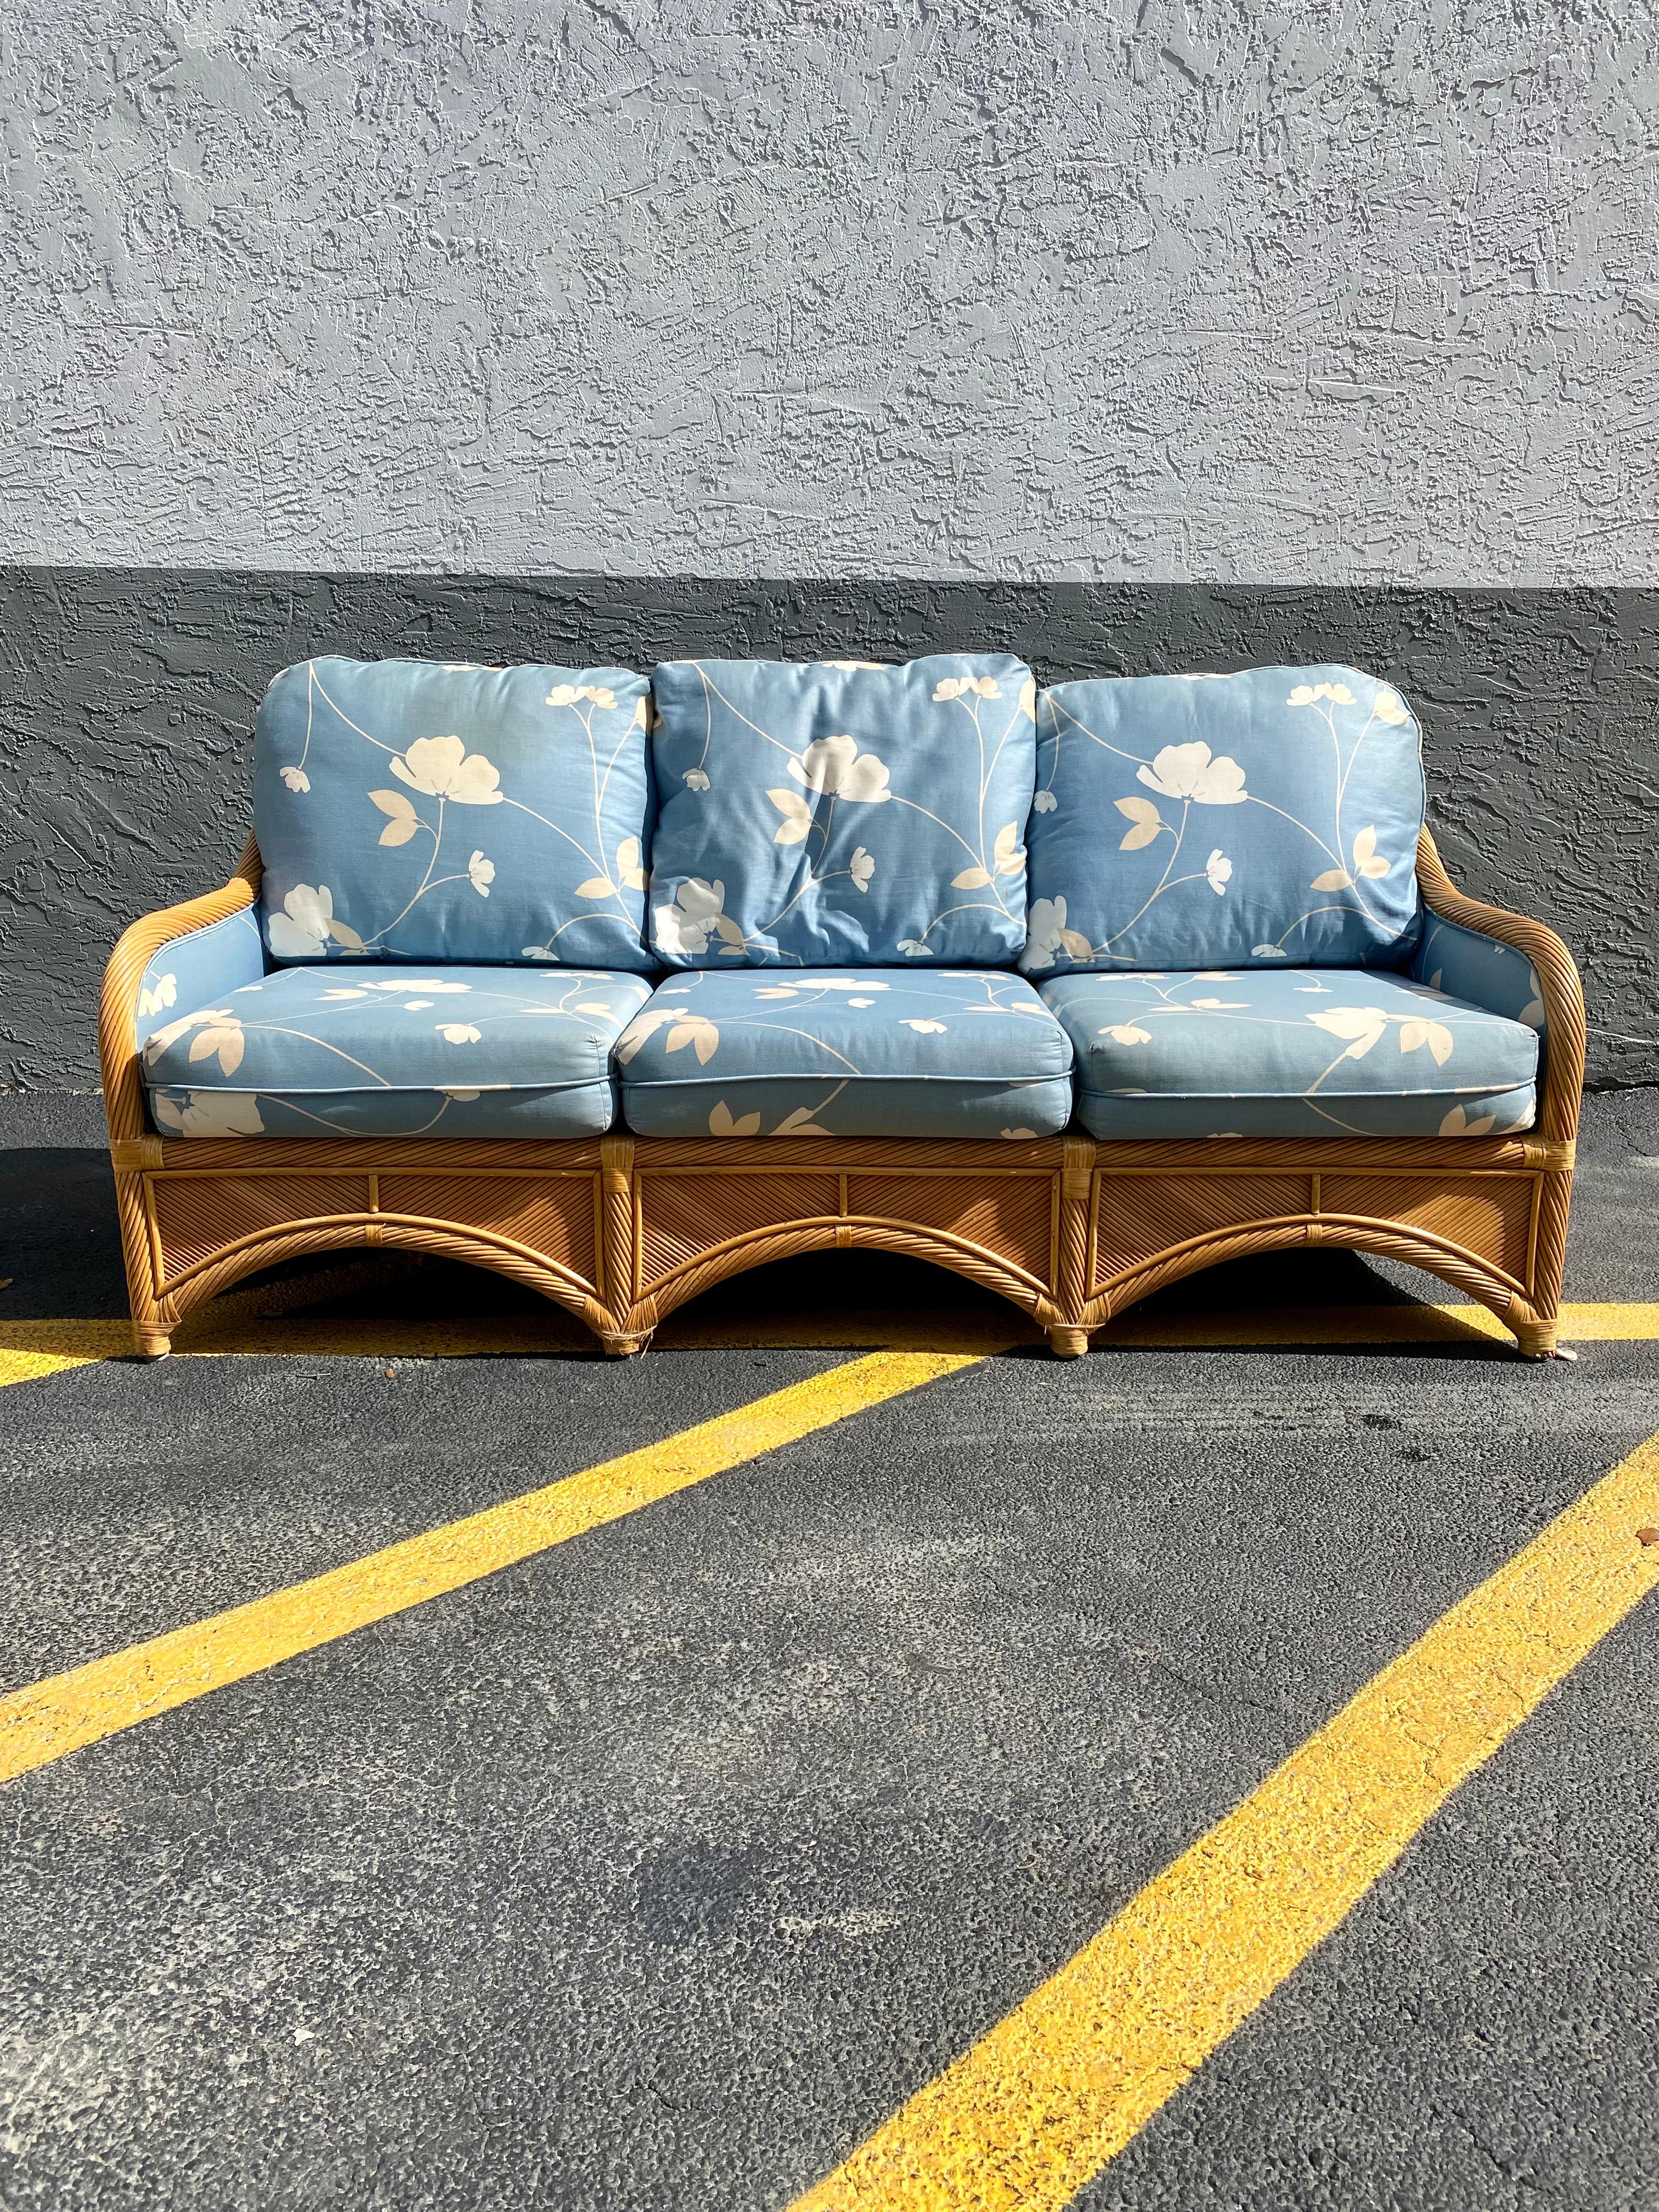 1970s Rattan Reed Sculptural Chinoiserie Style Blue White Sofa Suite, Set of 4 In Good Condition For Sale In Fort Lauderdale, FL